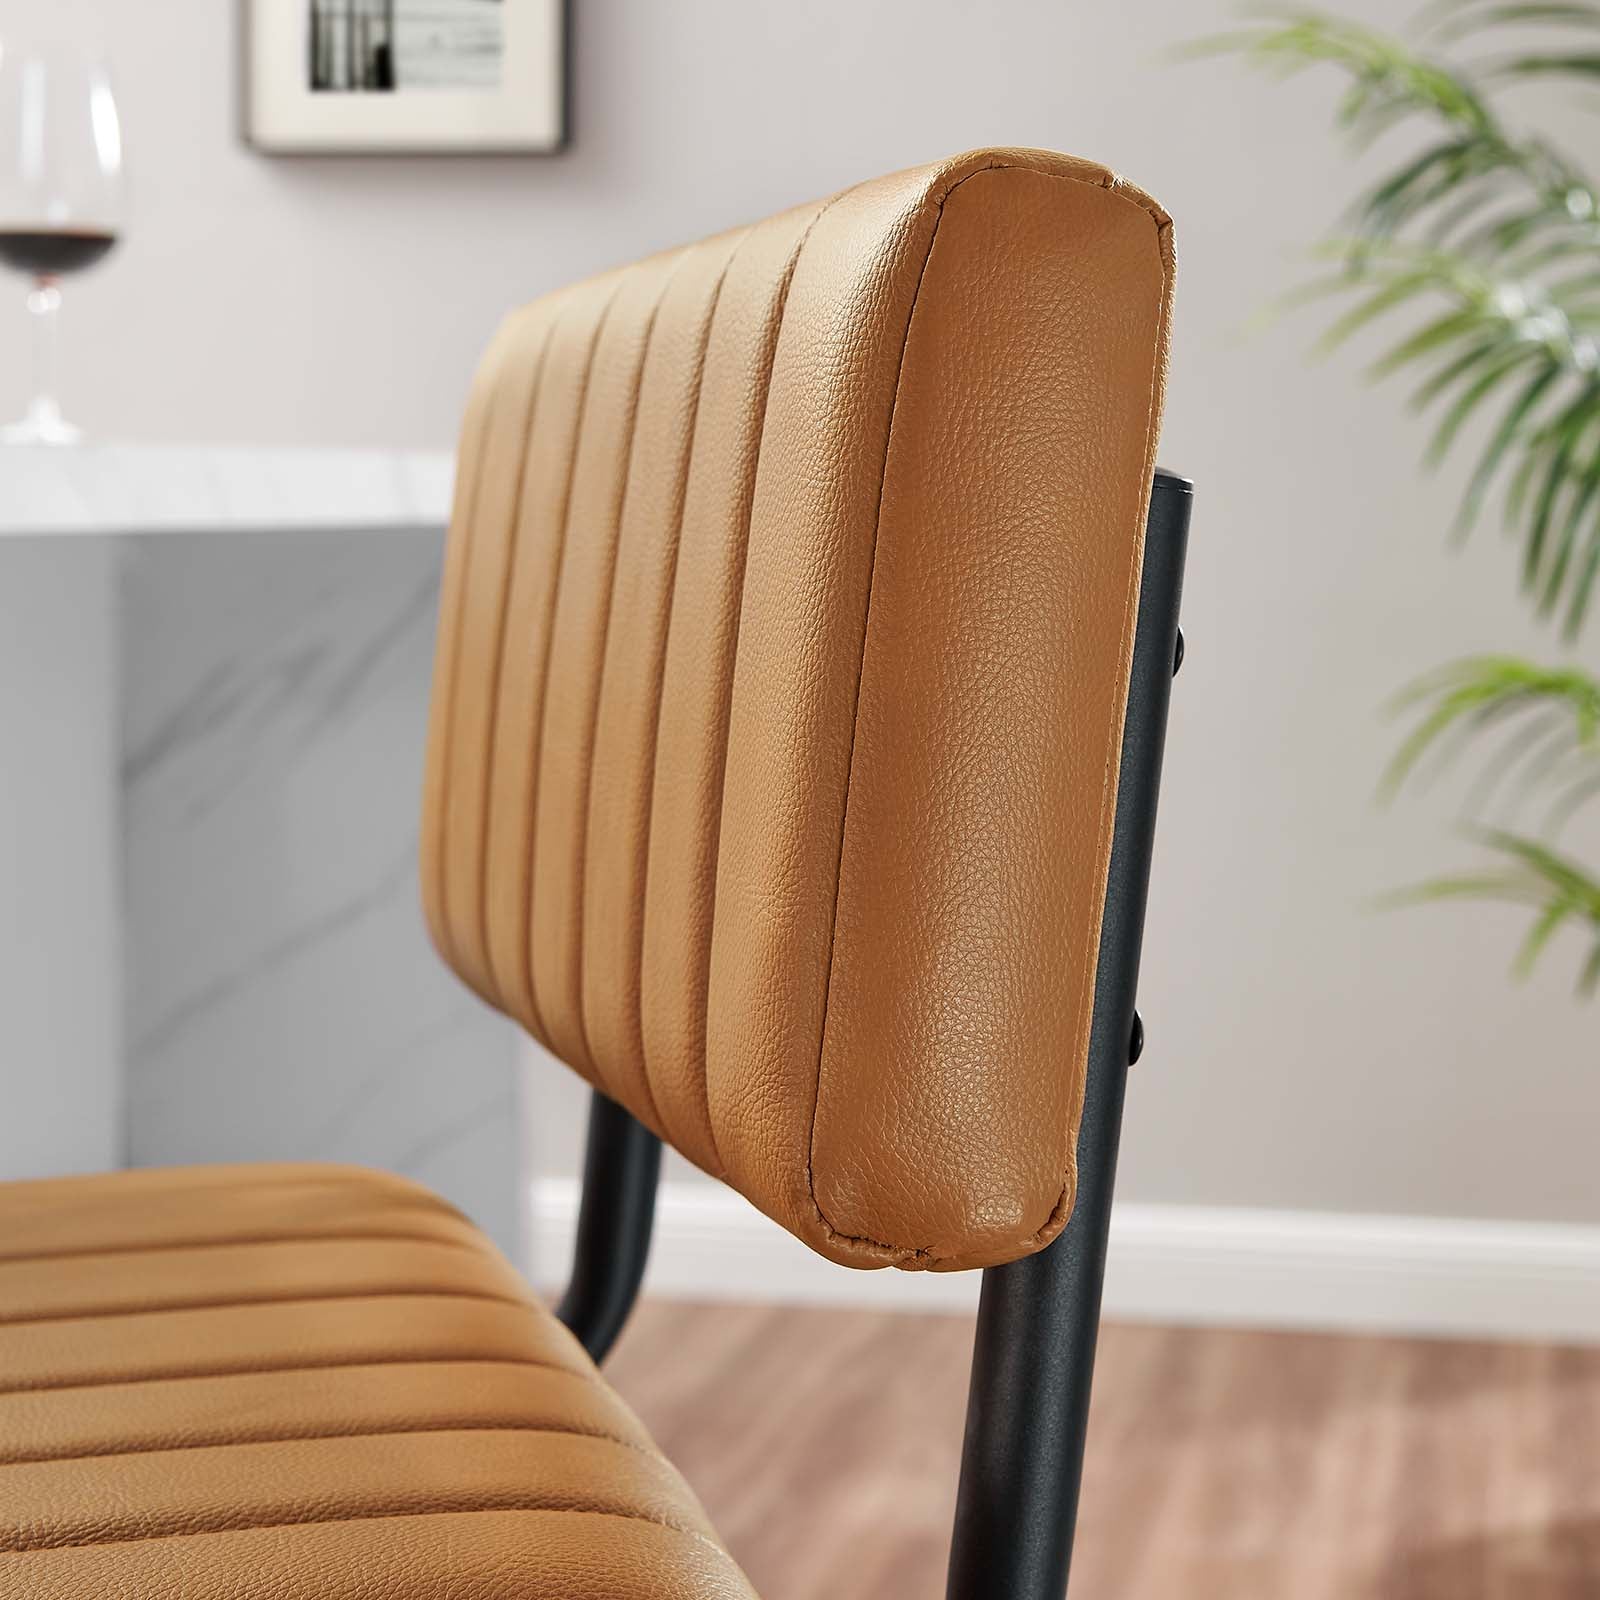 Parity Vegan Leather Counter Stools - Set of 2-Dining Chair-Modway-Wall2Wall Furnishings